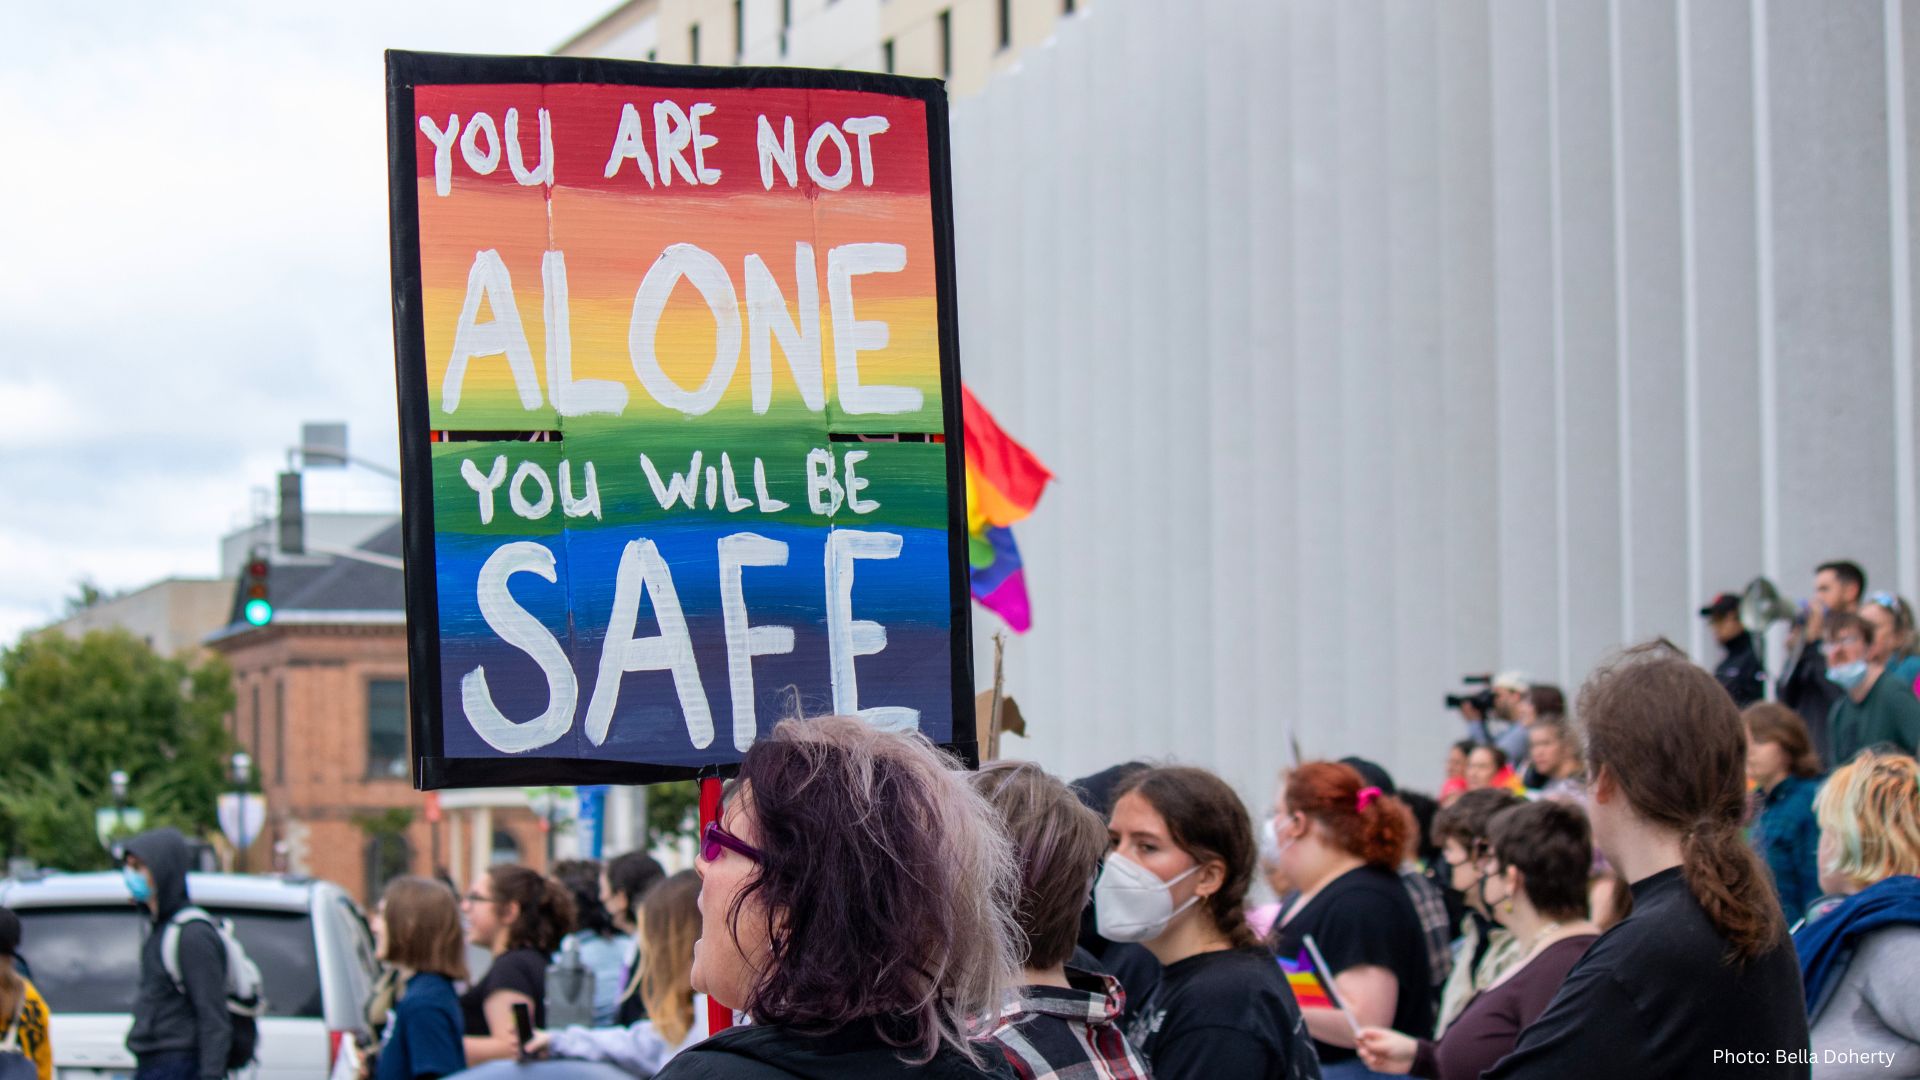 Image of sign above crowd saying "YOU ARE NOT ALONE YOU WILL BE SAFE"